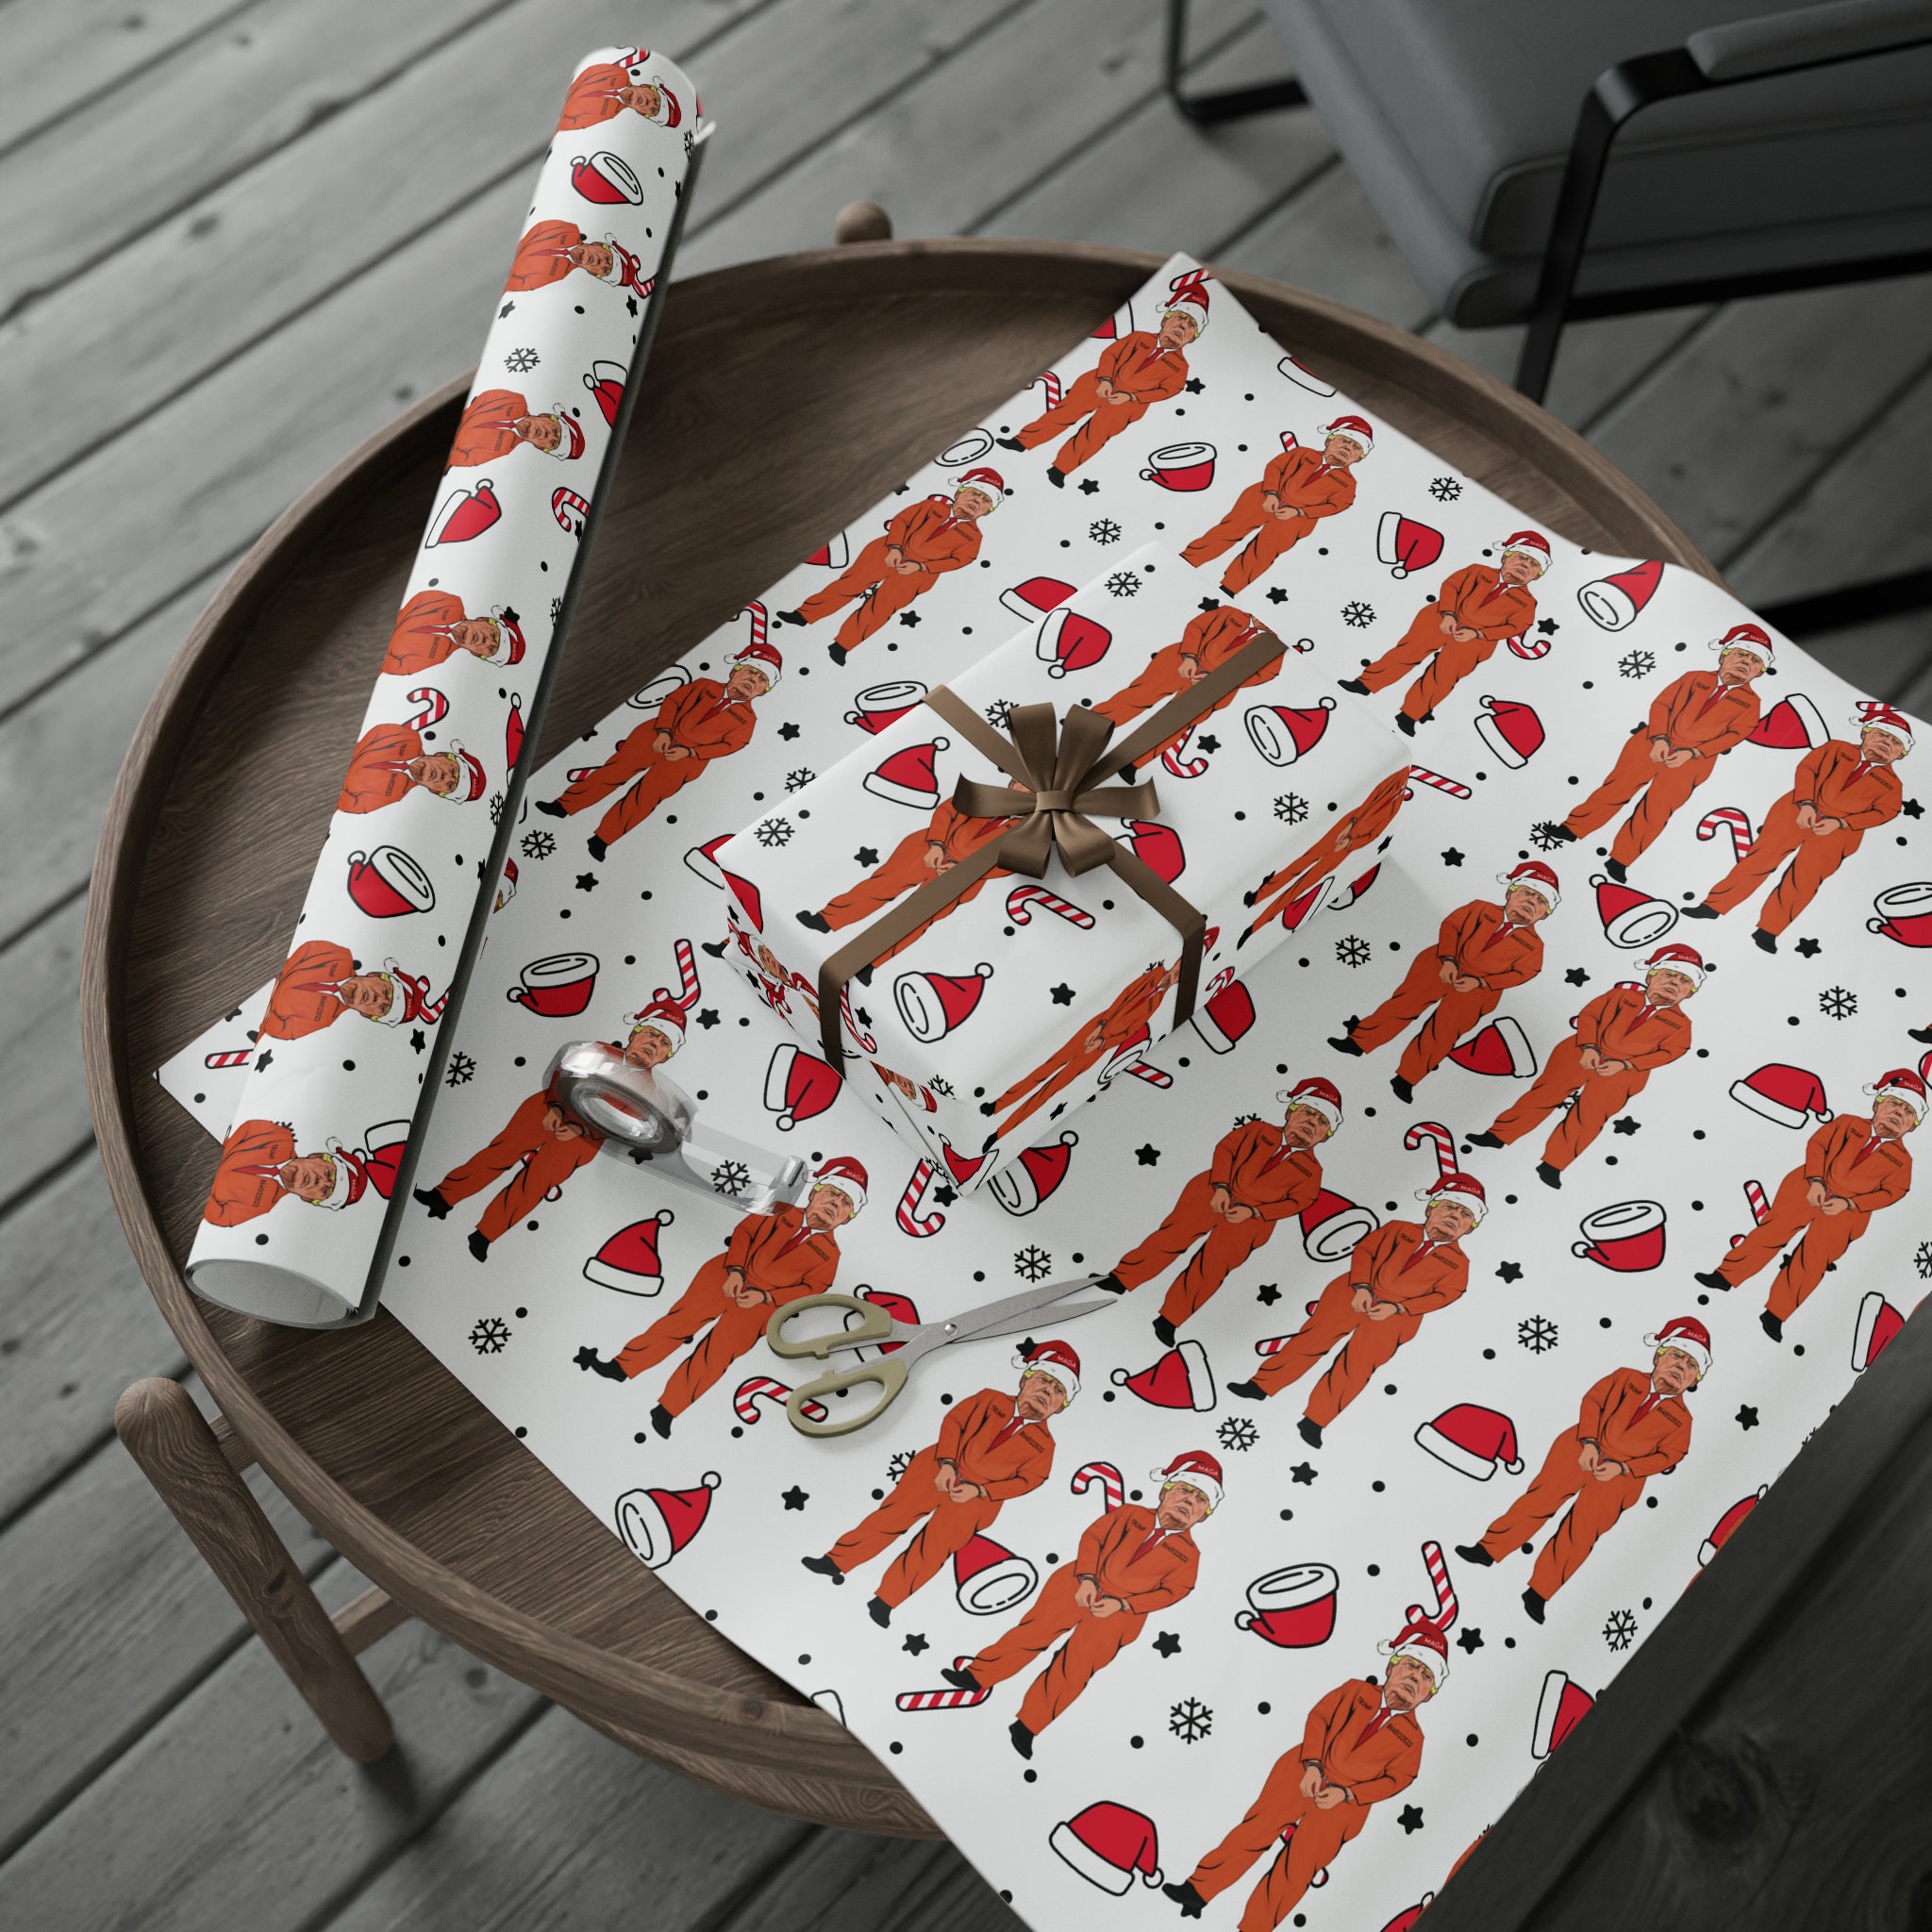 Make America Great Again MAGA Trump Wrapping Paper for Gifts - Pro Trump  Let's Go Brandon Christmas Gift Wrap Brandon Maga Gift Wrap Santa Trump